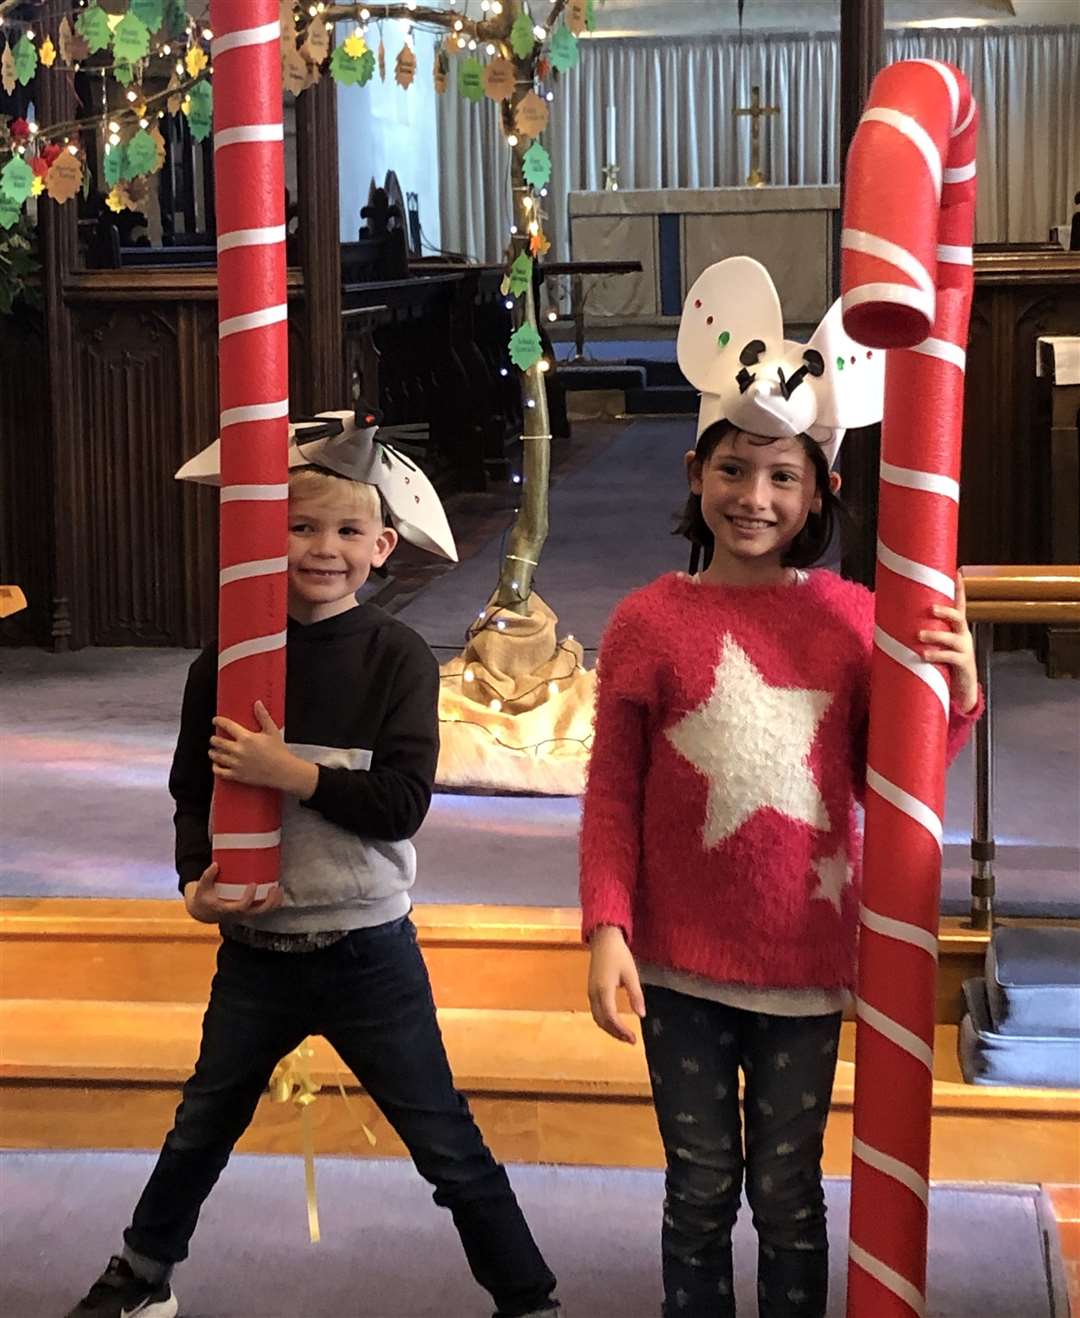 Ronnie Alkin, six and Nahla Sayer, eight, took part in a creative workshop at St Mildred's church during which they made masks for the Christmas parade (21385704)